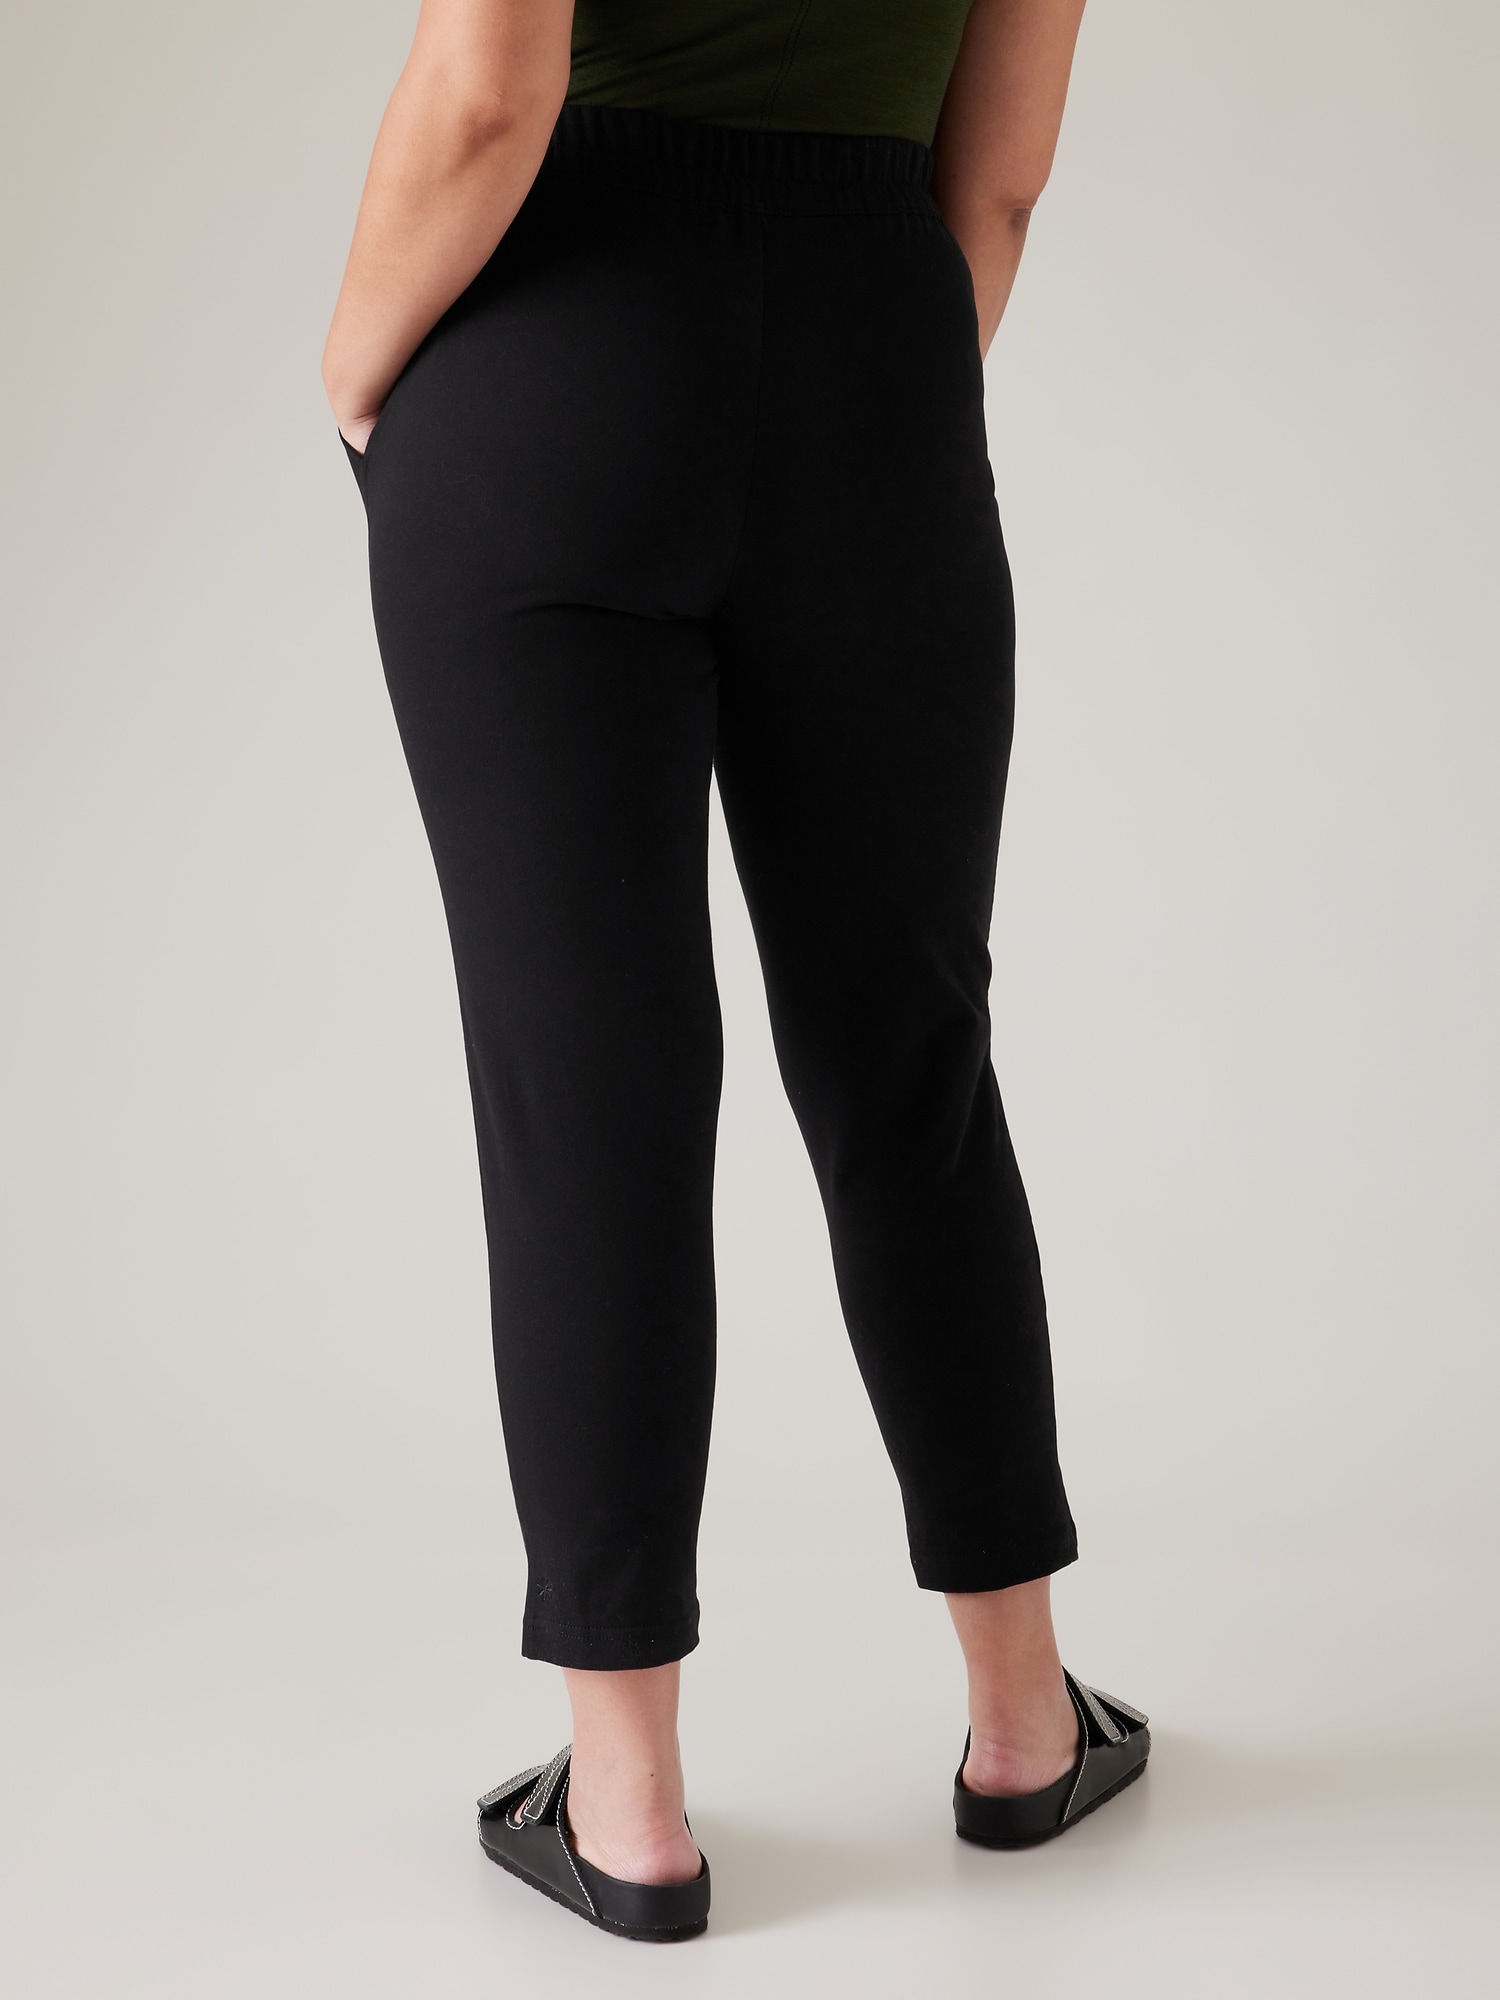 Retroterry Tapered Pant | Athleta